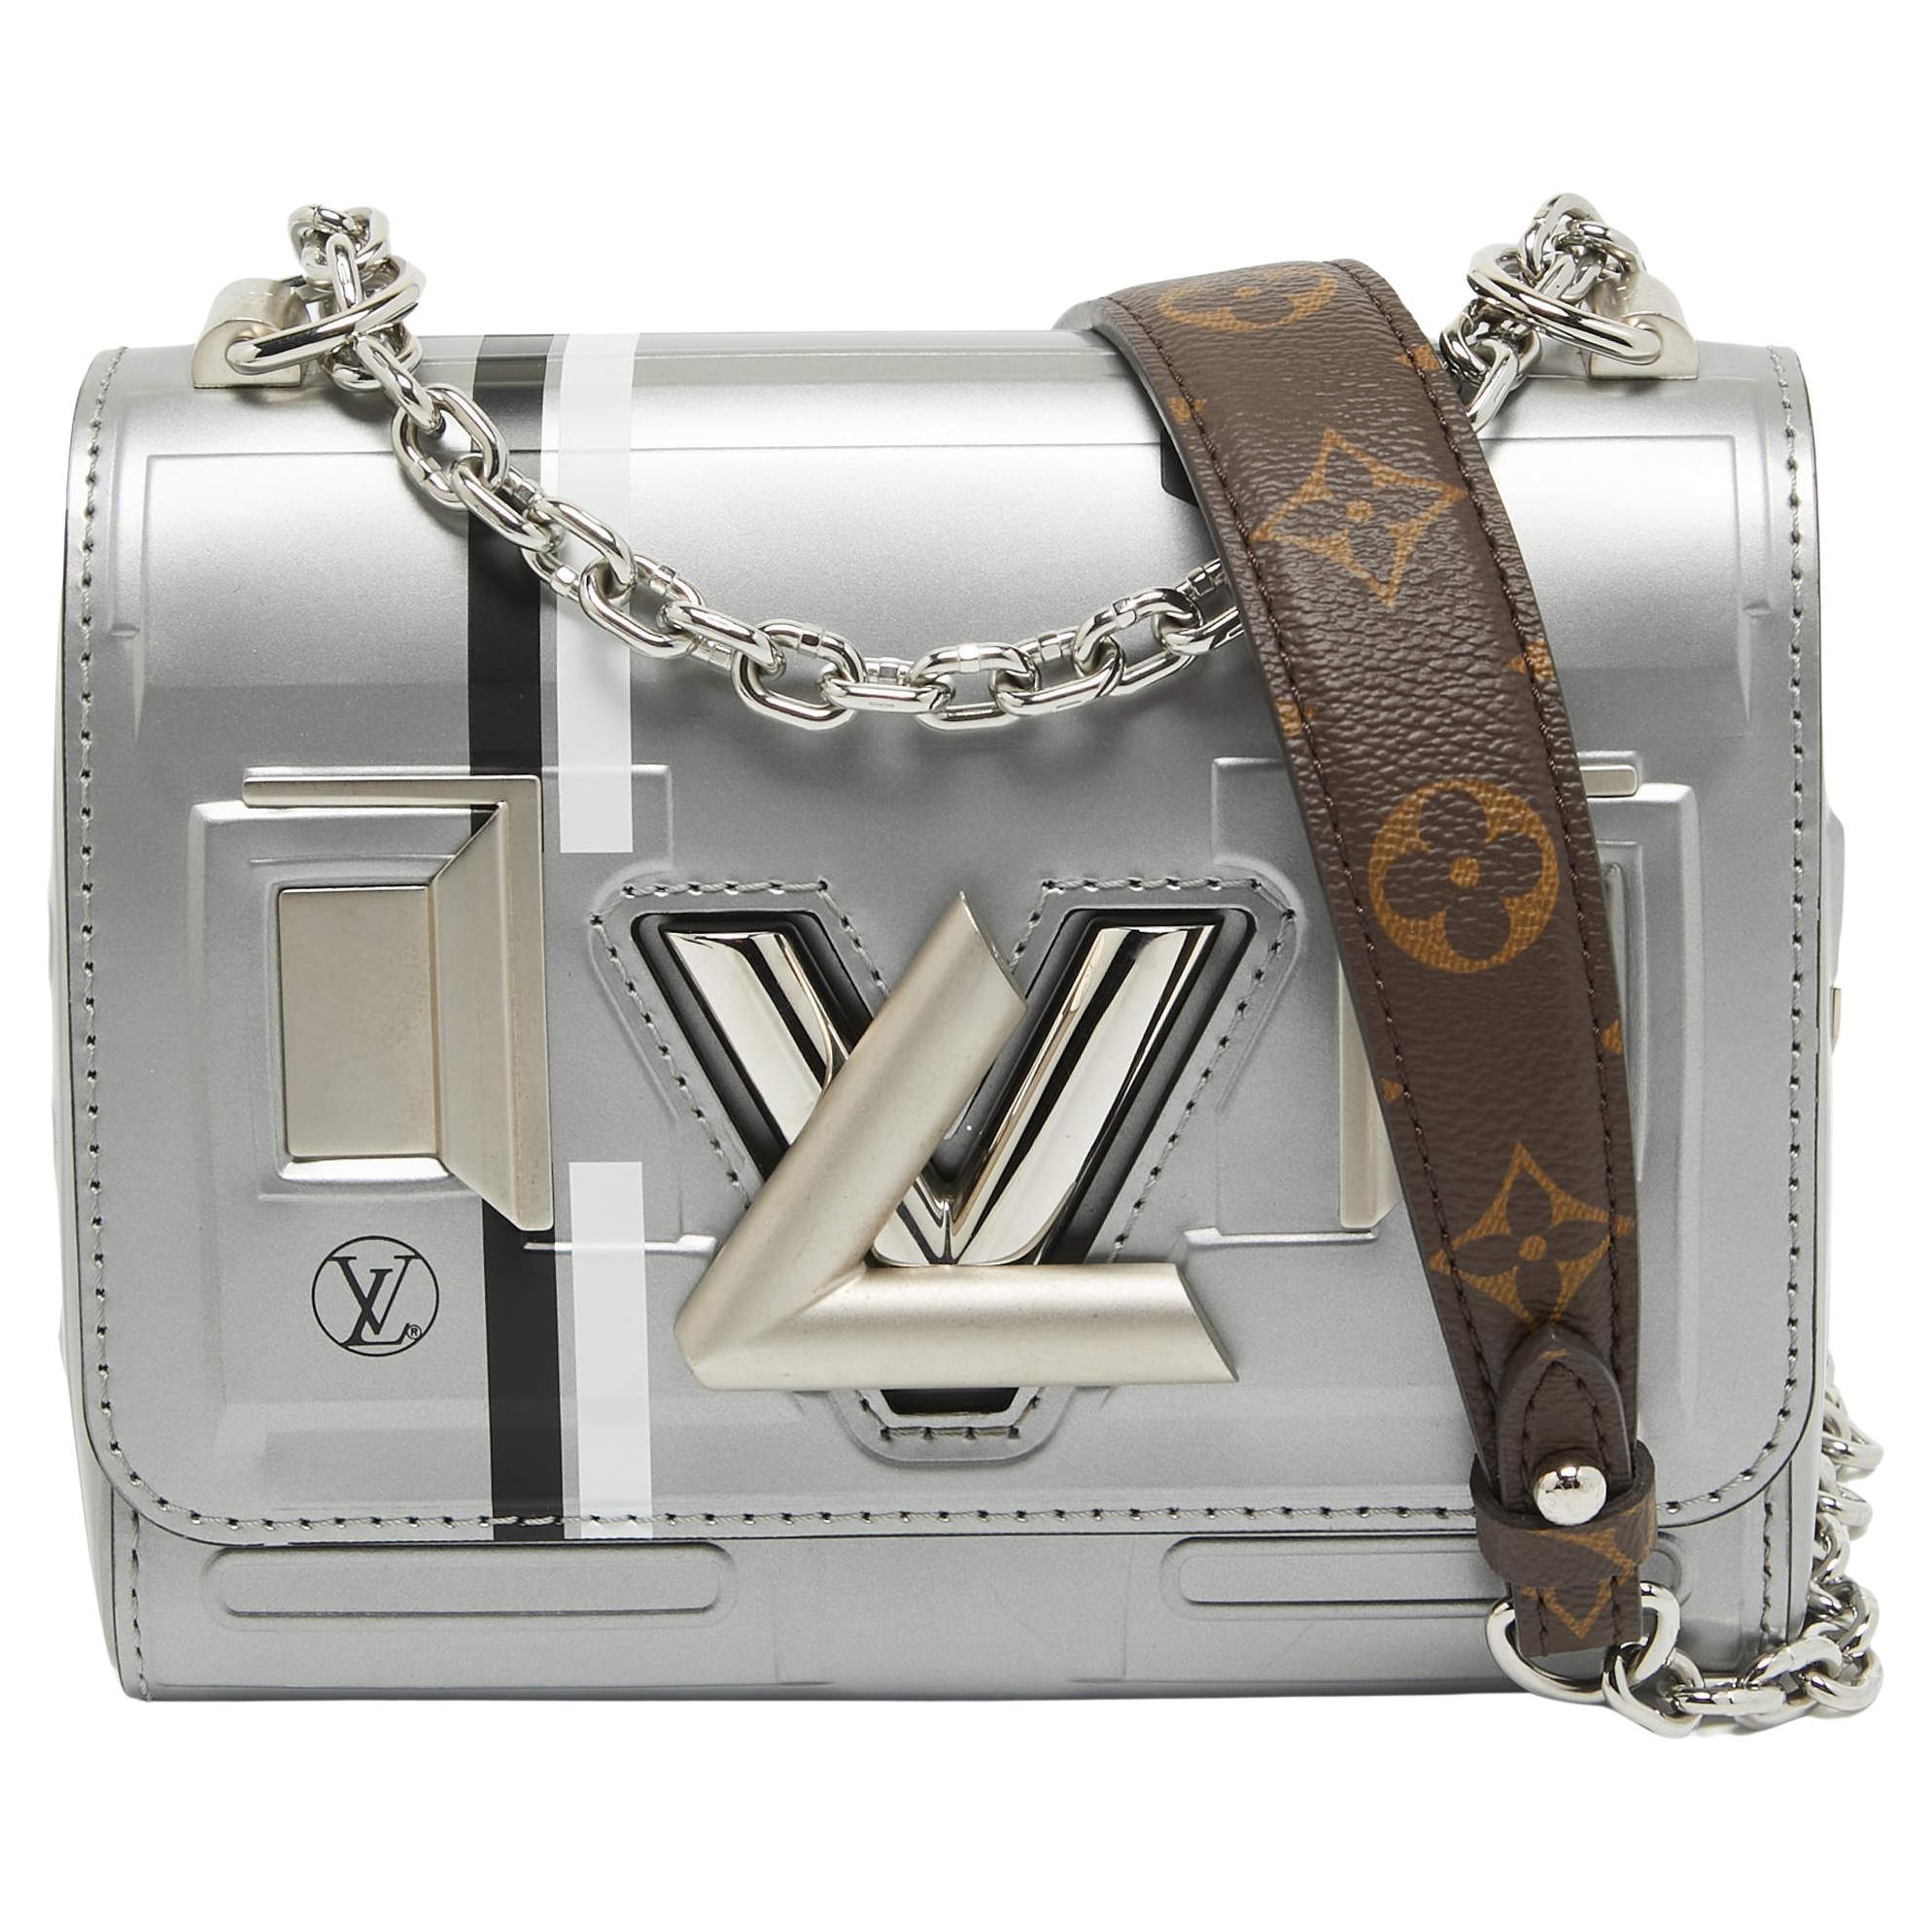 Louis Vuitton Grey Leather Spaceship Twist PM Bag For Sale